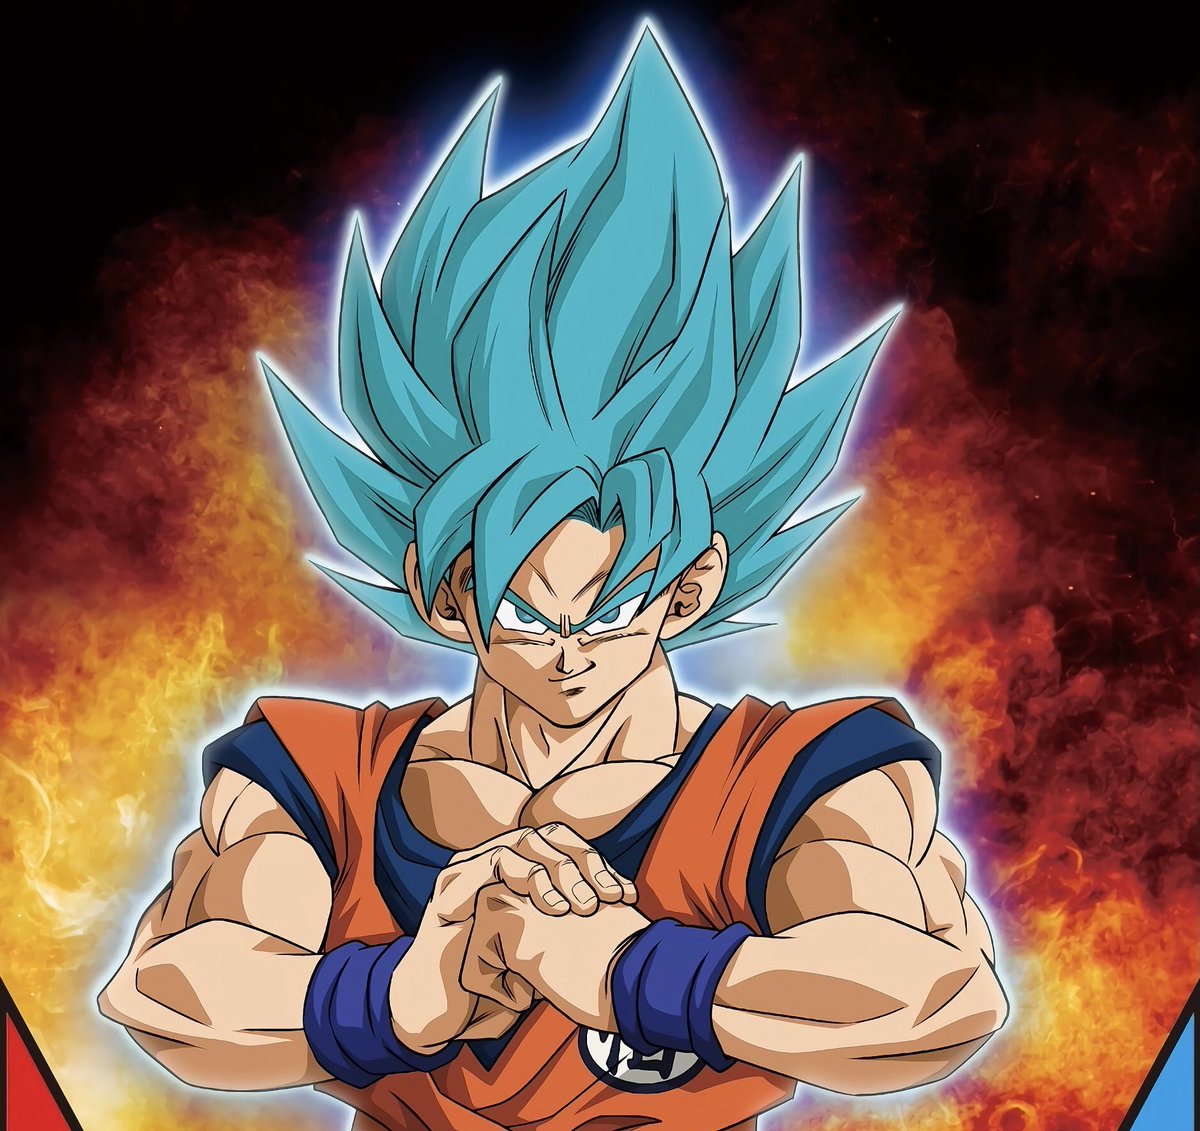 Renaldo ã‚µã‚¤ãƒ¤äºº On Twitter Time To Bless Your Timeline Here Is A Great Promo Art Of Goku Ssb From The Dragon Ball Games Battle Hour